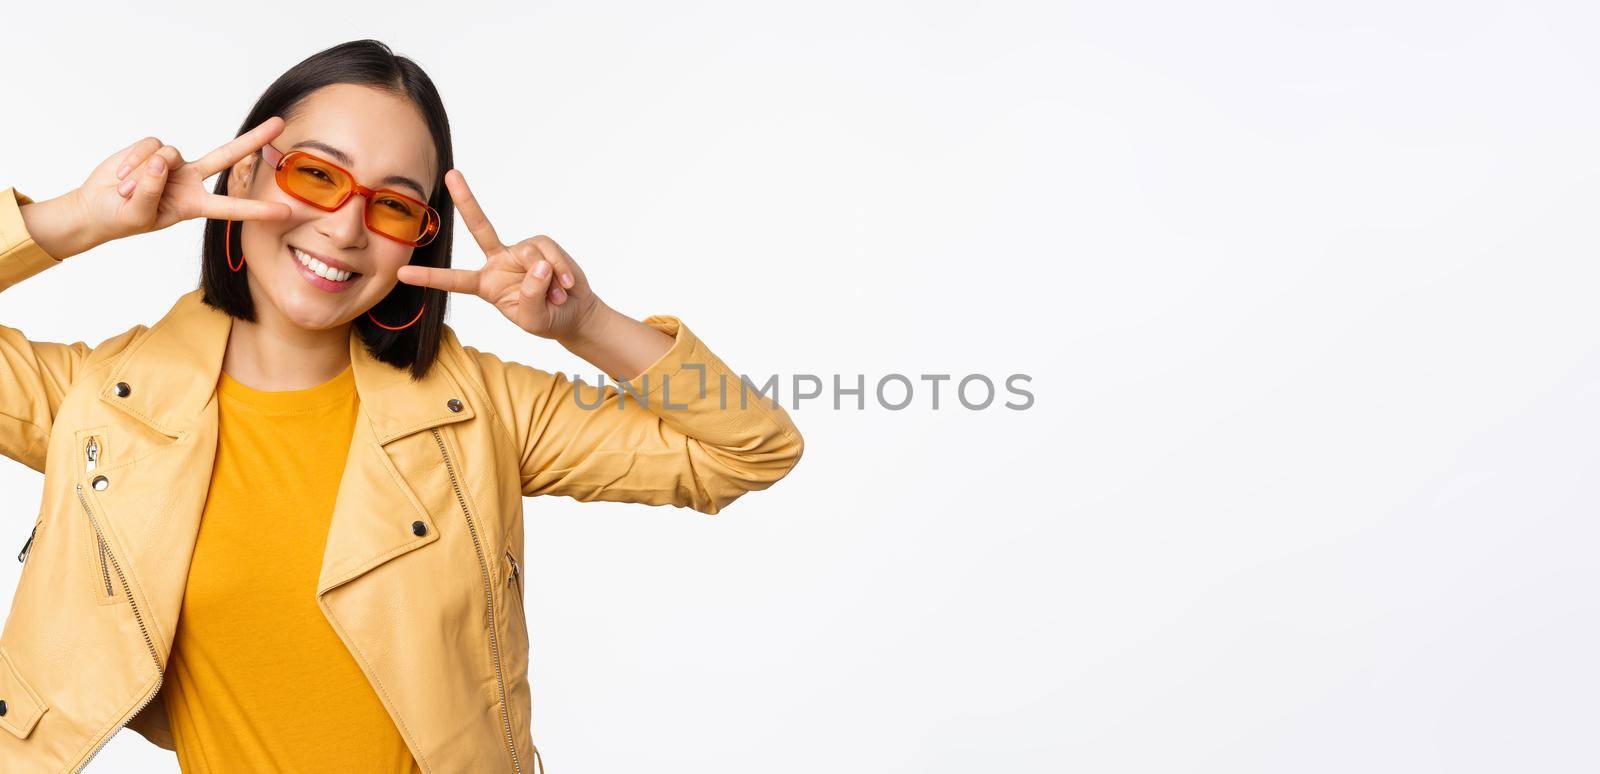 Portrait of stylish asian modern girl, wearing sunglasses and yellow jacket, showing peace, v-sign gesture, standing over white background, happy smiling face.